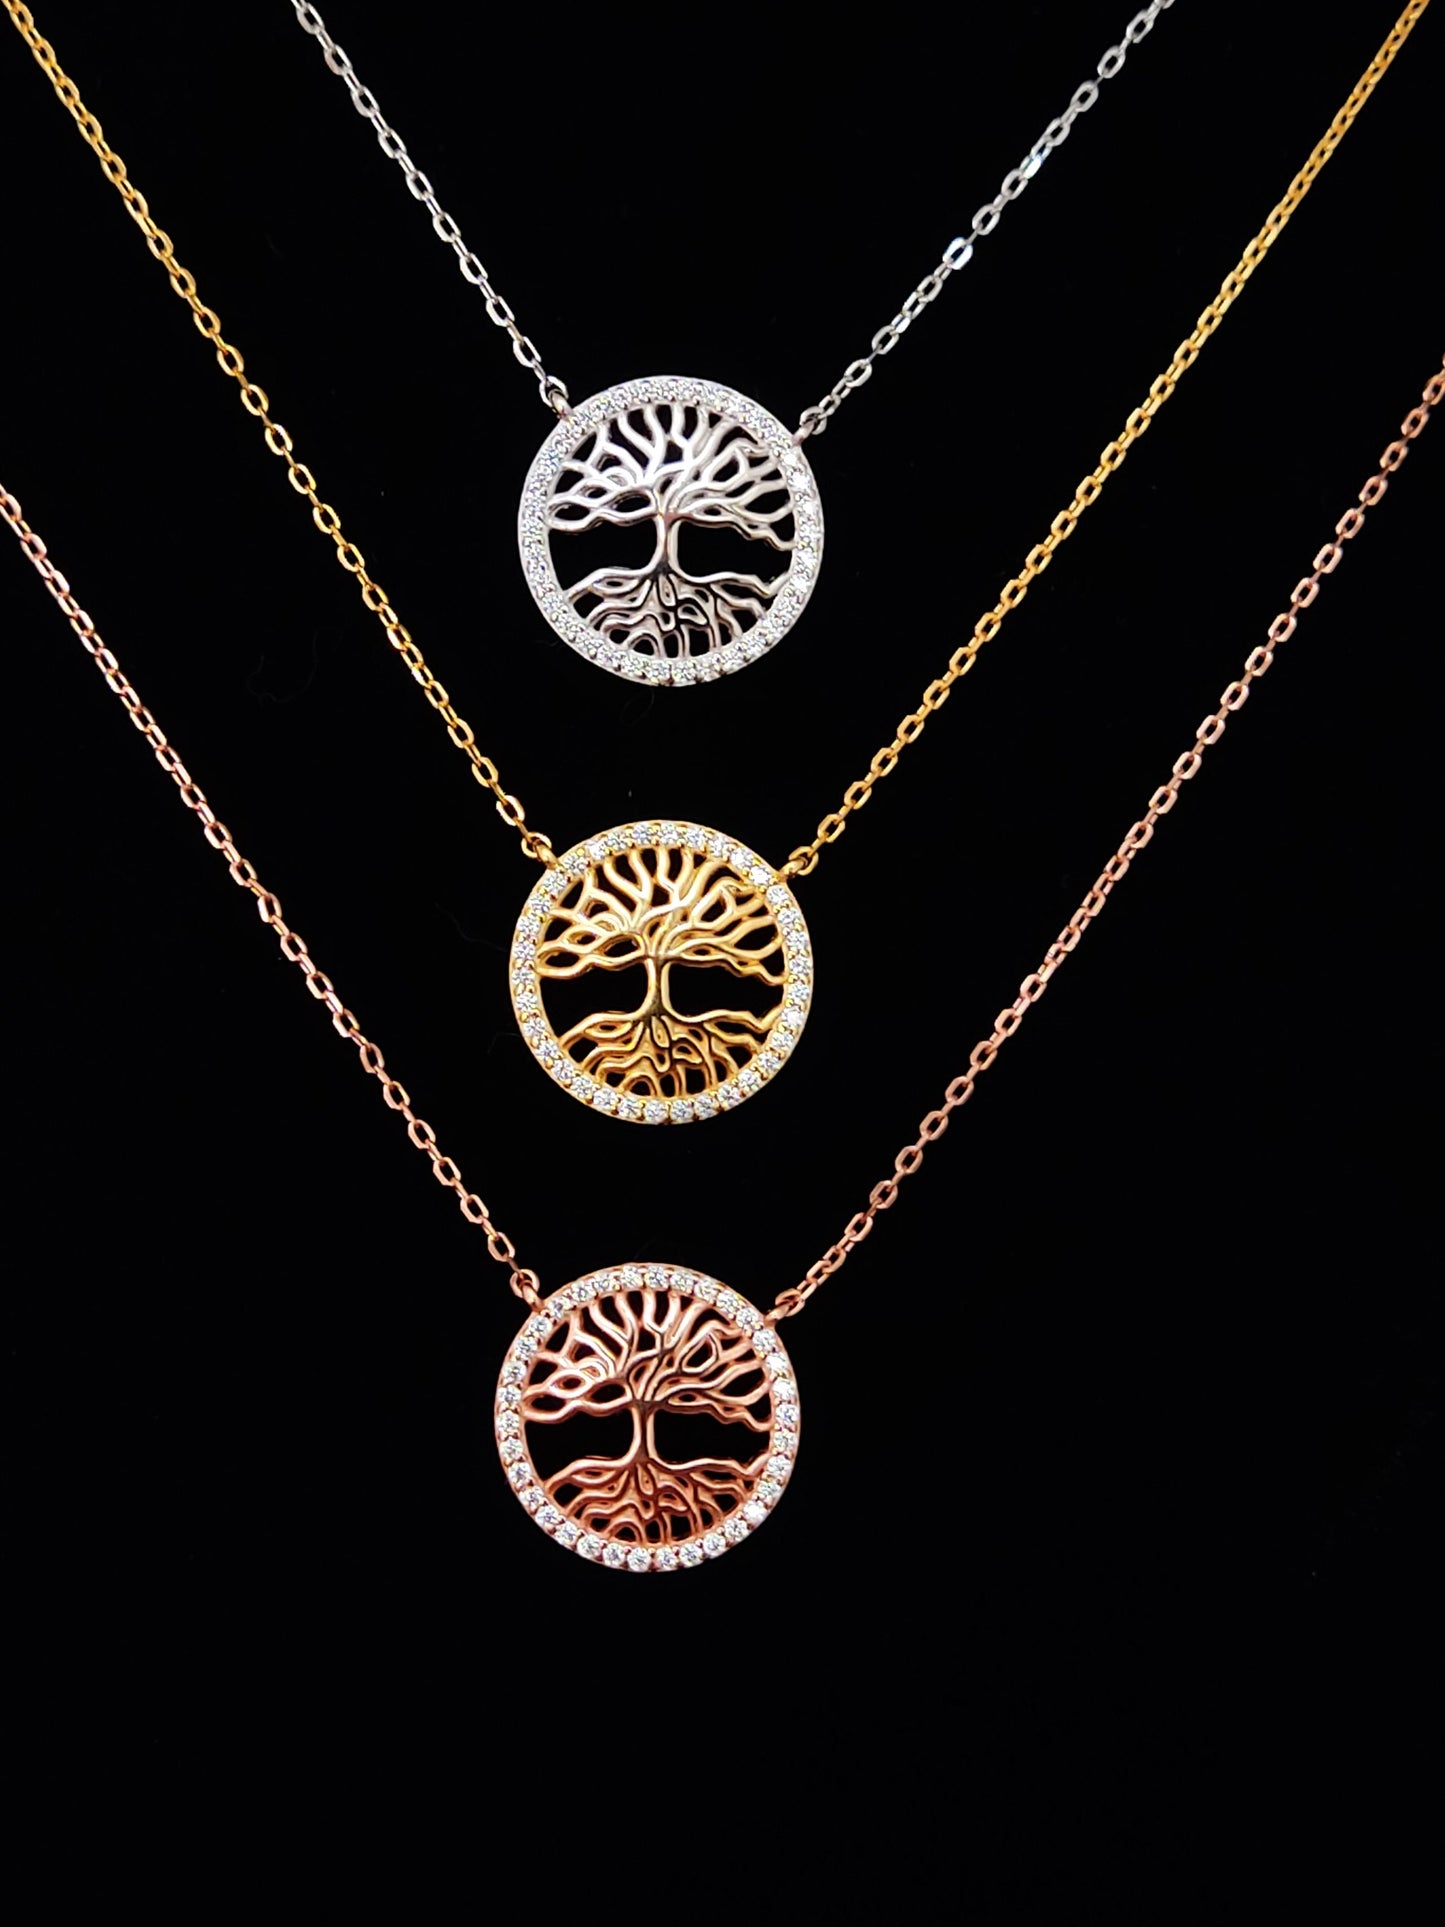 Sterling Silver 925 Silver-Gold-Rose Gold Small Tree Of Life Pendant Necklace, Tiny Tree Of Life Pendant 15mm, Minimalist Necklace Jewelry